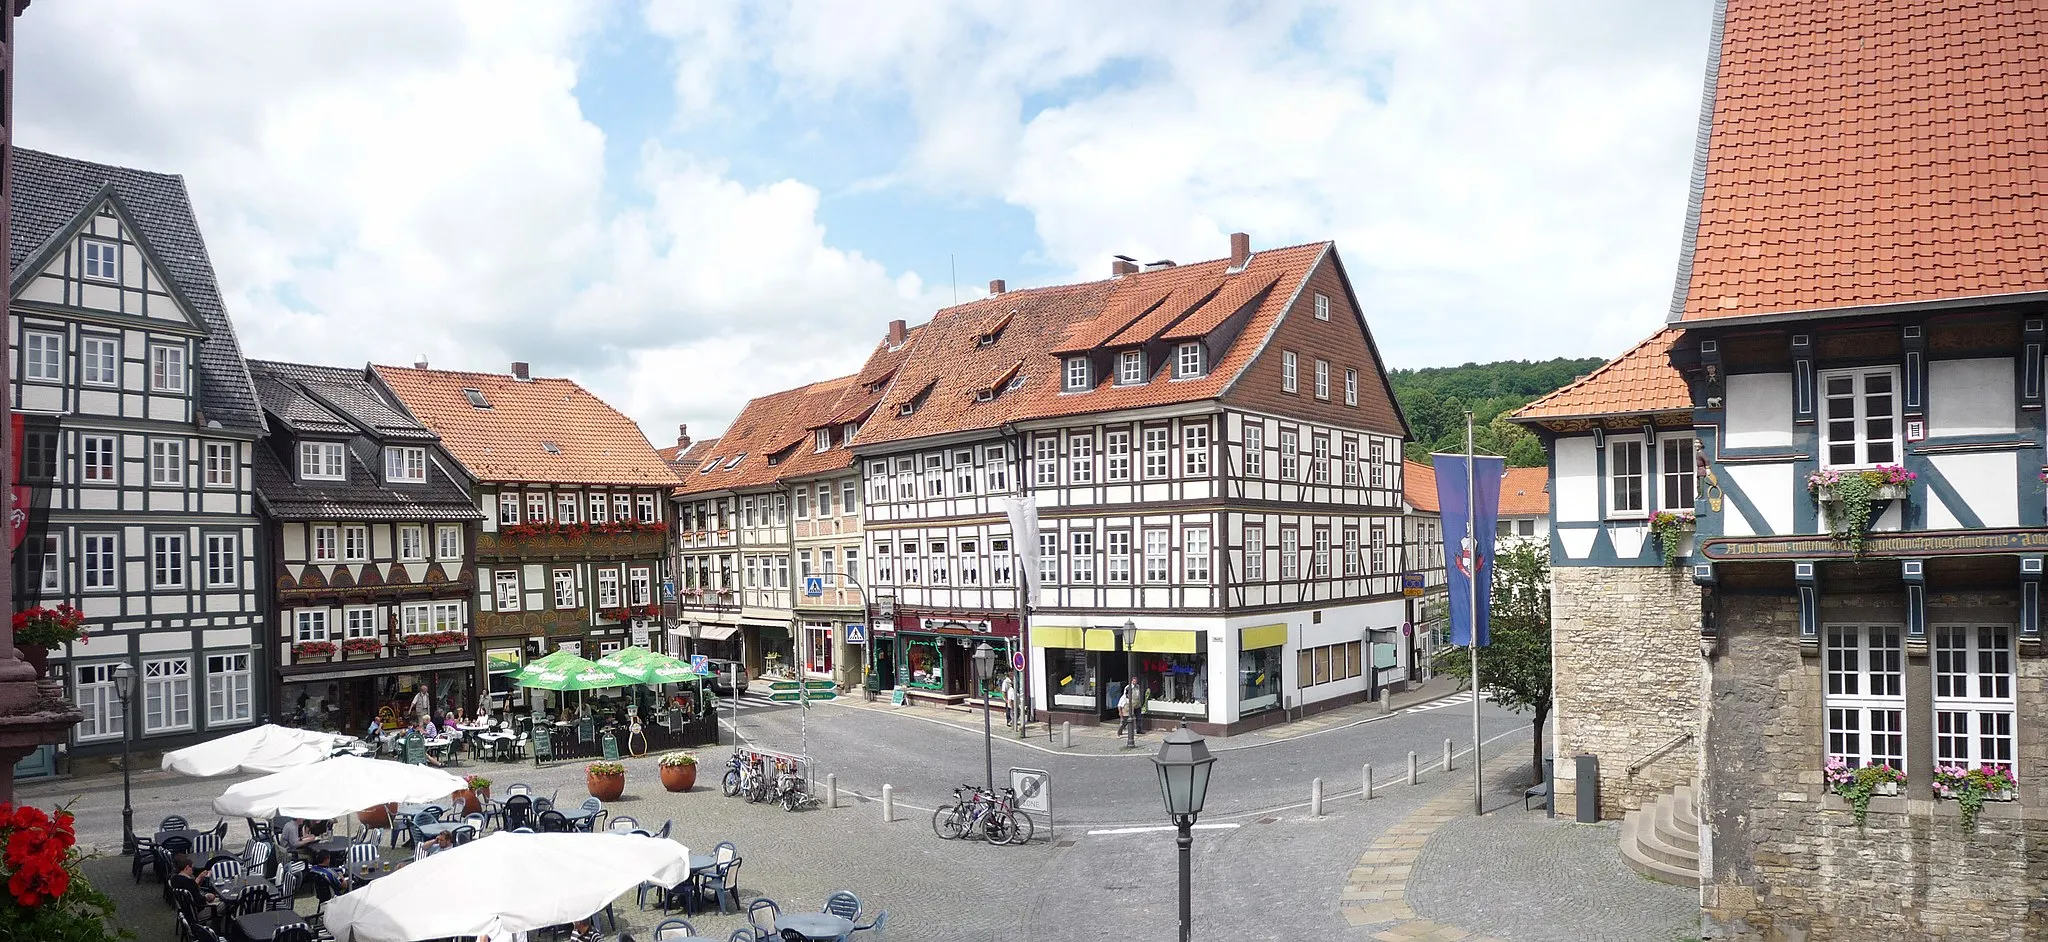 Photo showing: Market place in Bad Gandersheim, Lower Saxony in Germany